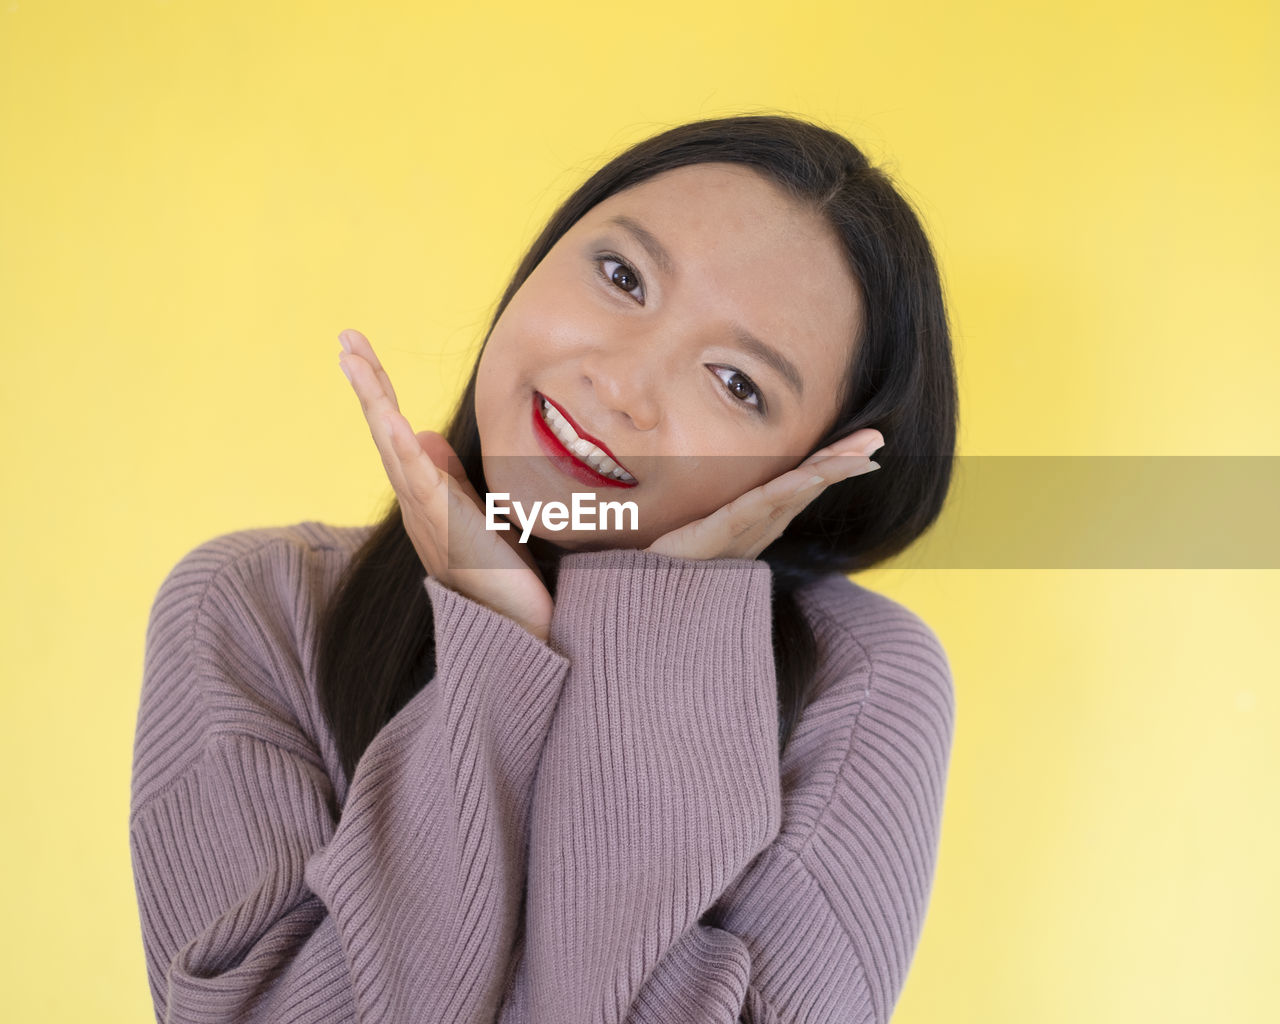 PORTRAIT OF SMILING YOUNG WOMAN AGAINST YELLOW BACKGROUND